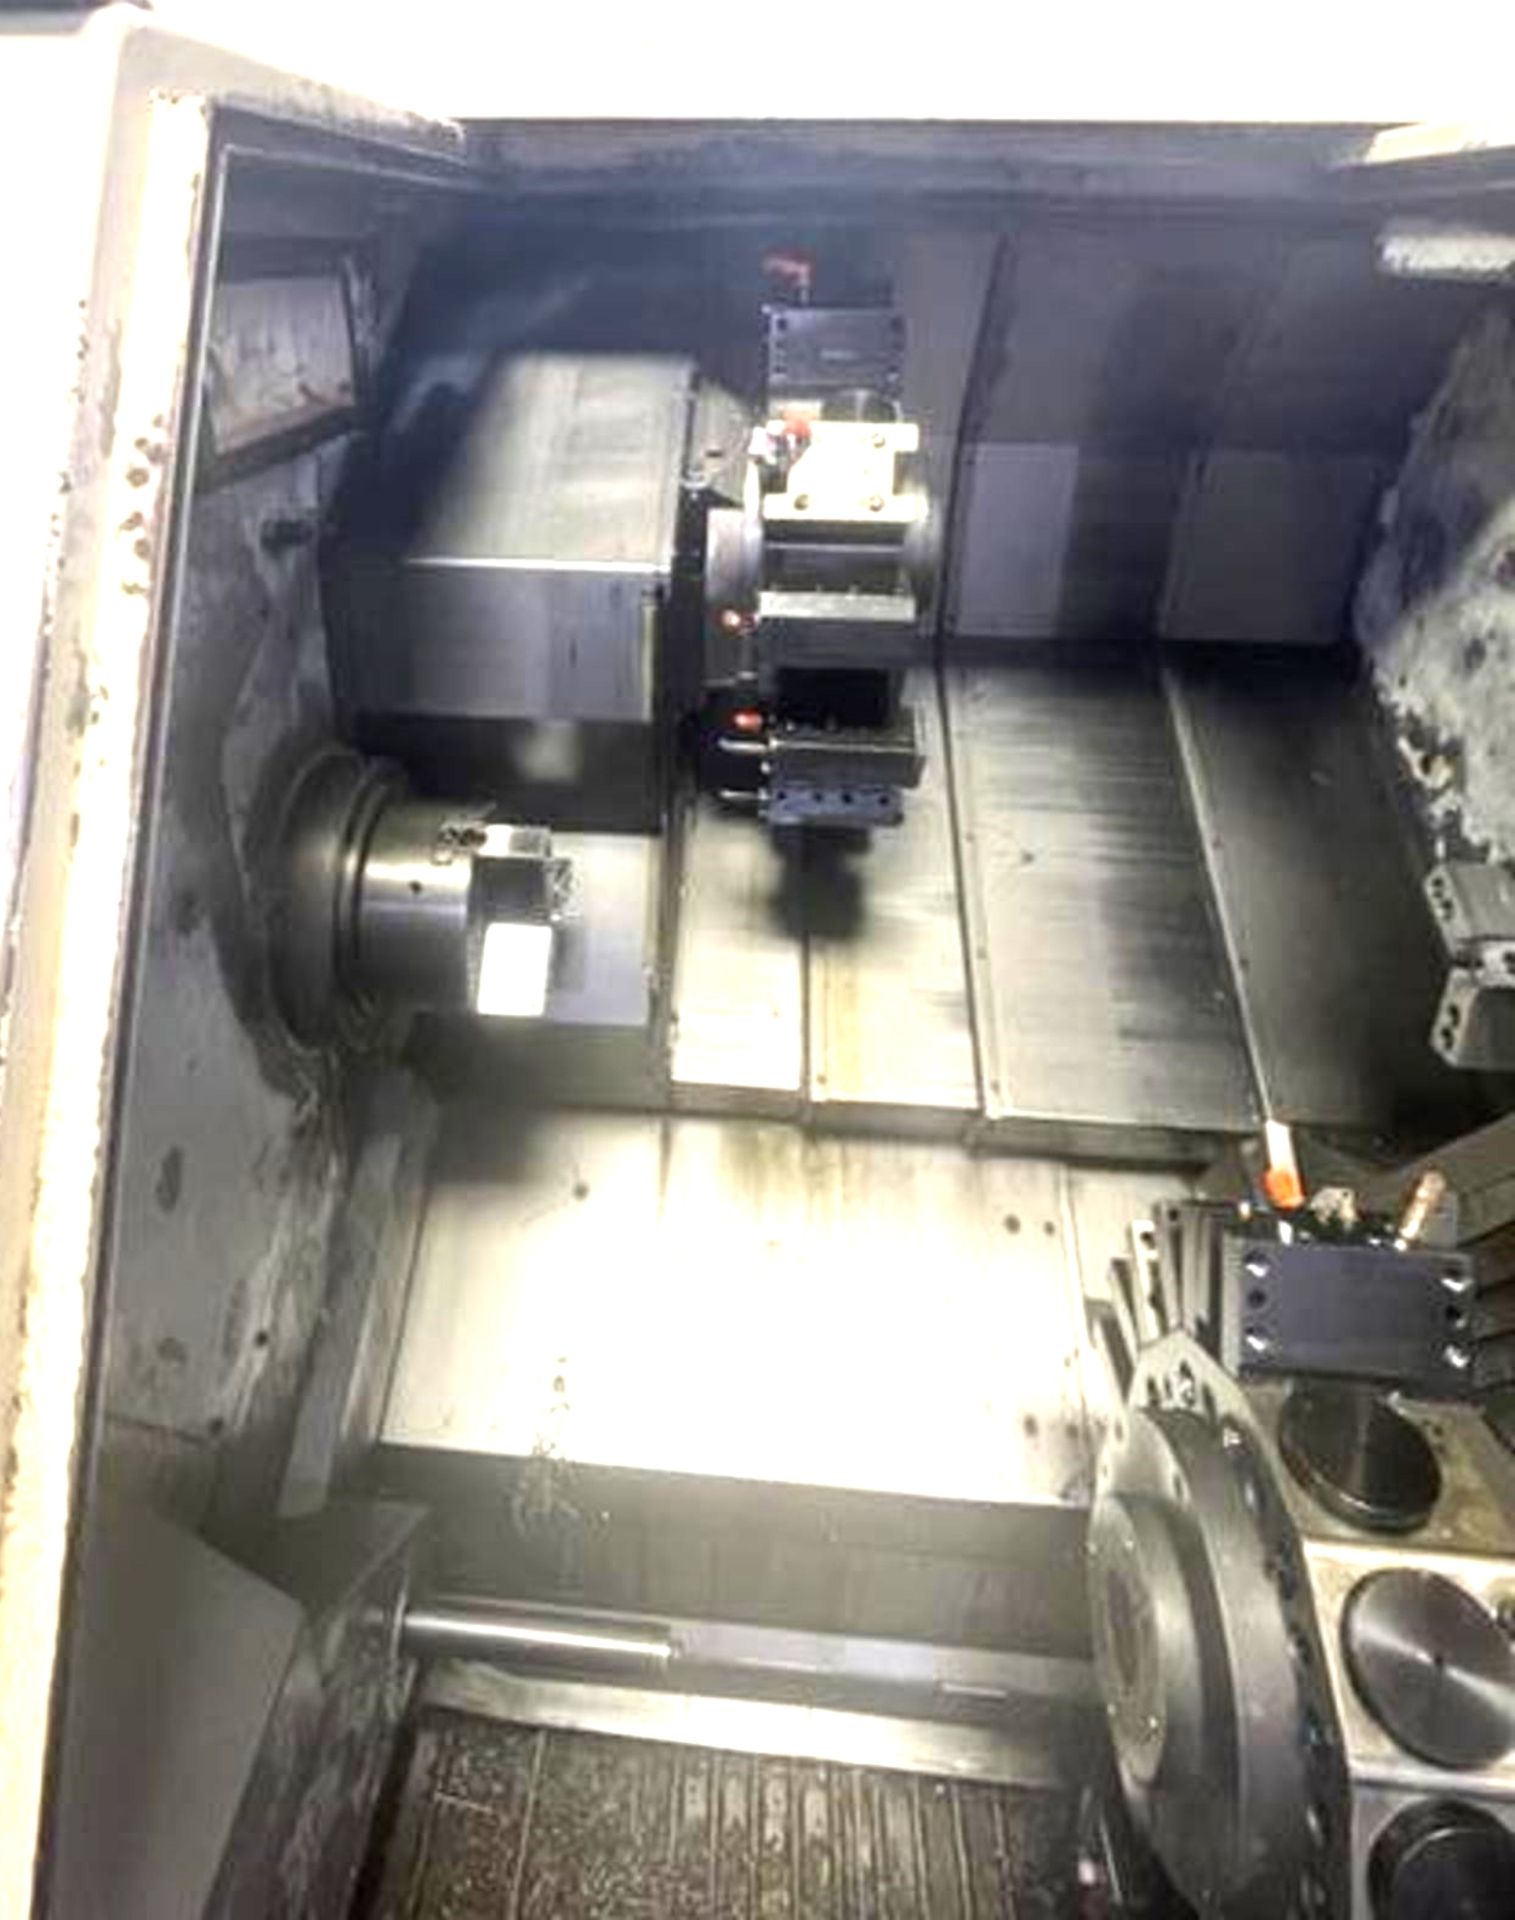 OKUMA LT-10MW 7-AXIS CNC TURNING CENTER LATHE, TWIN TURRET, SPINDLE & C-AXIS, LIVE TOOLING, - Image 4 of 14